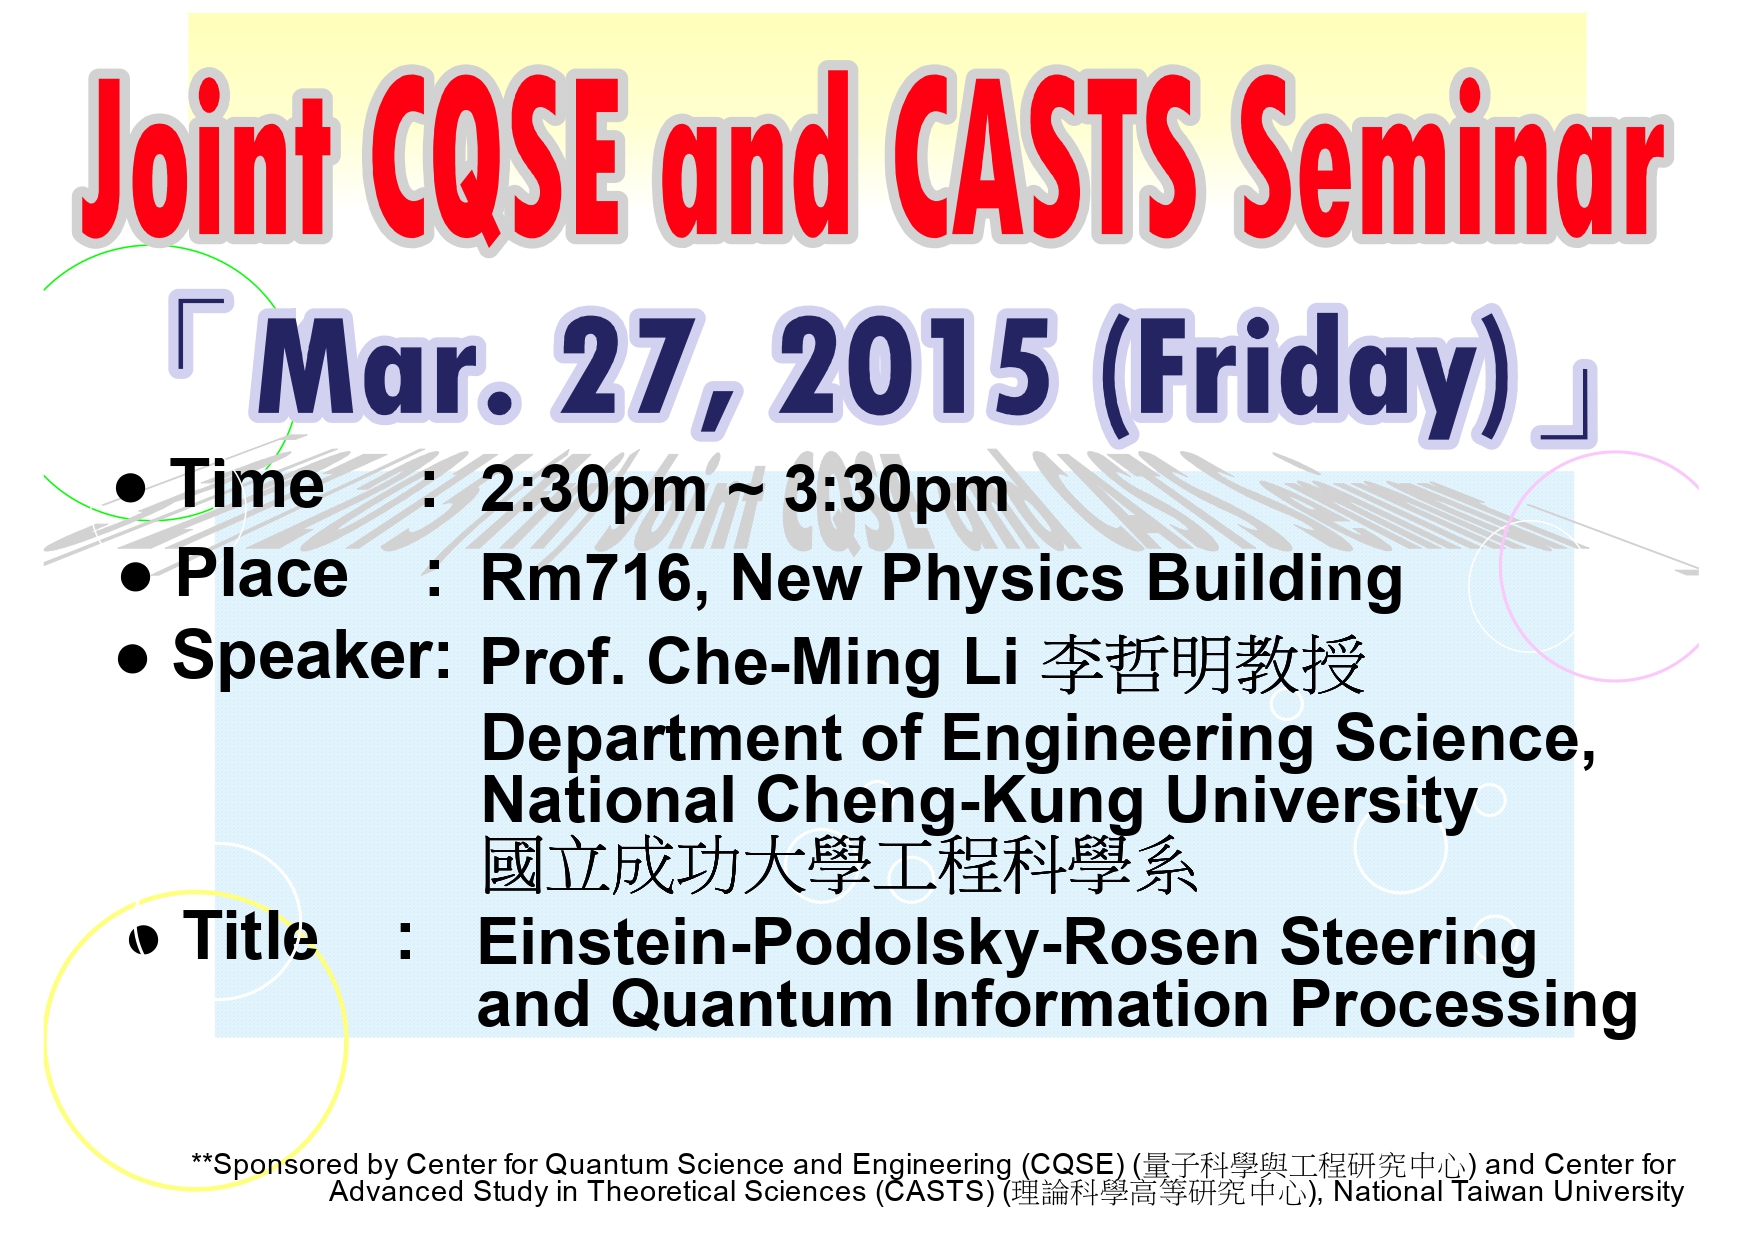 [Cancelled] Joint CQSE and CASTS Seminar